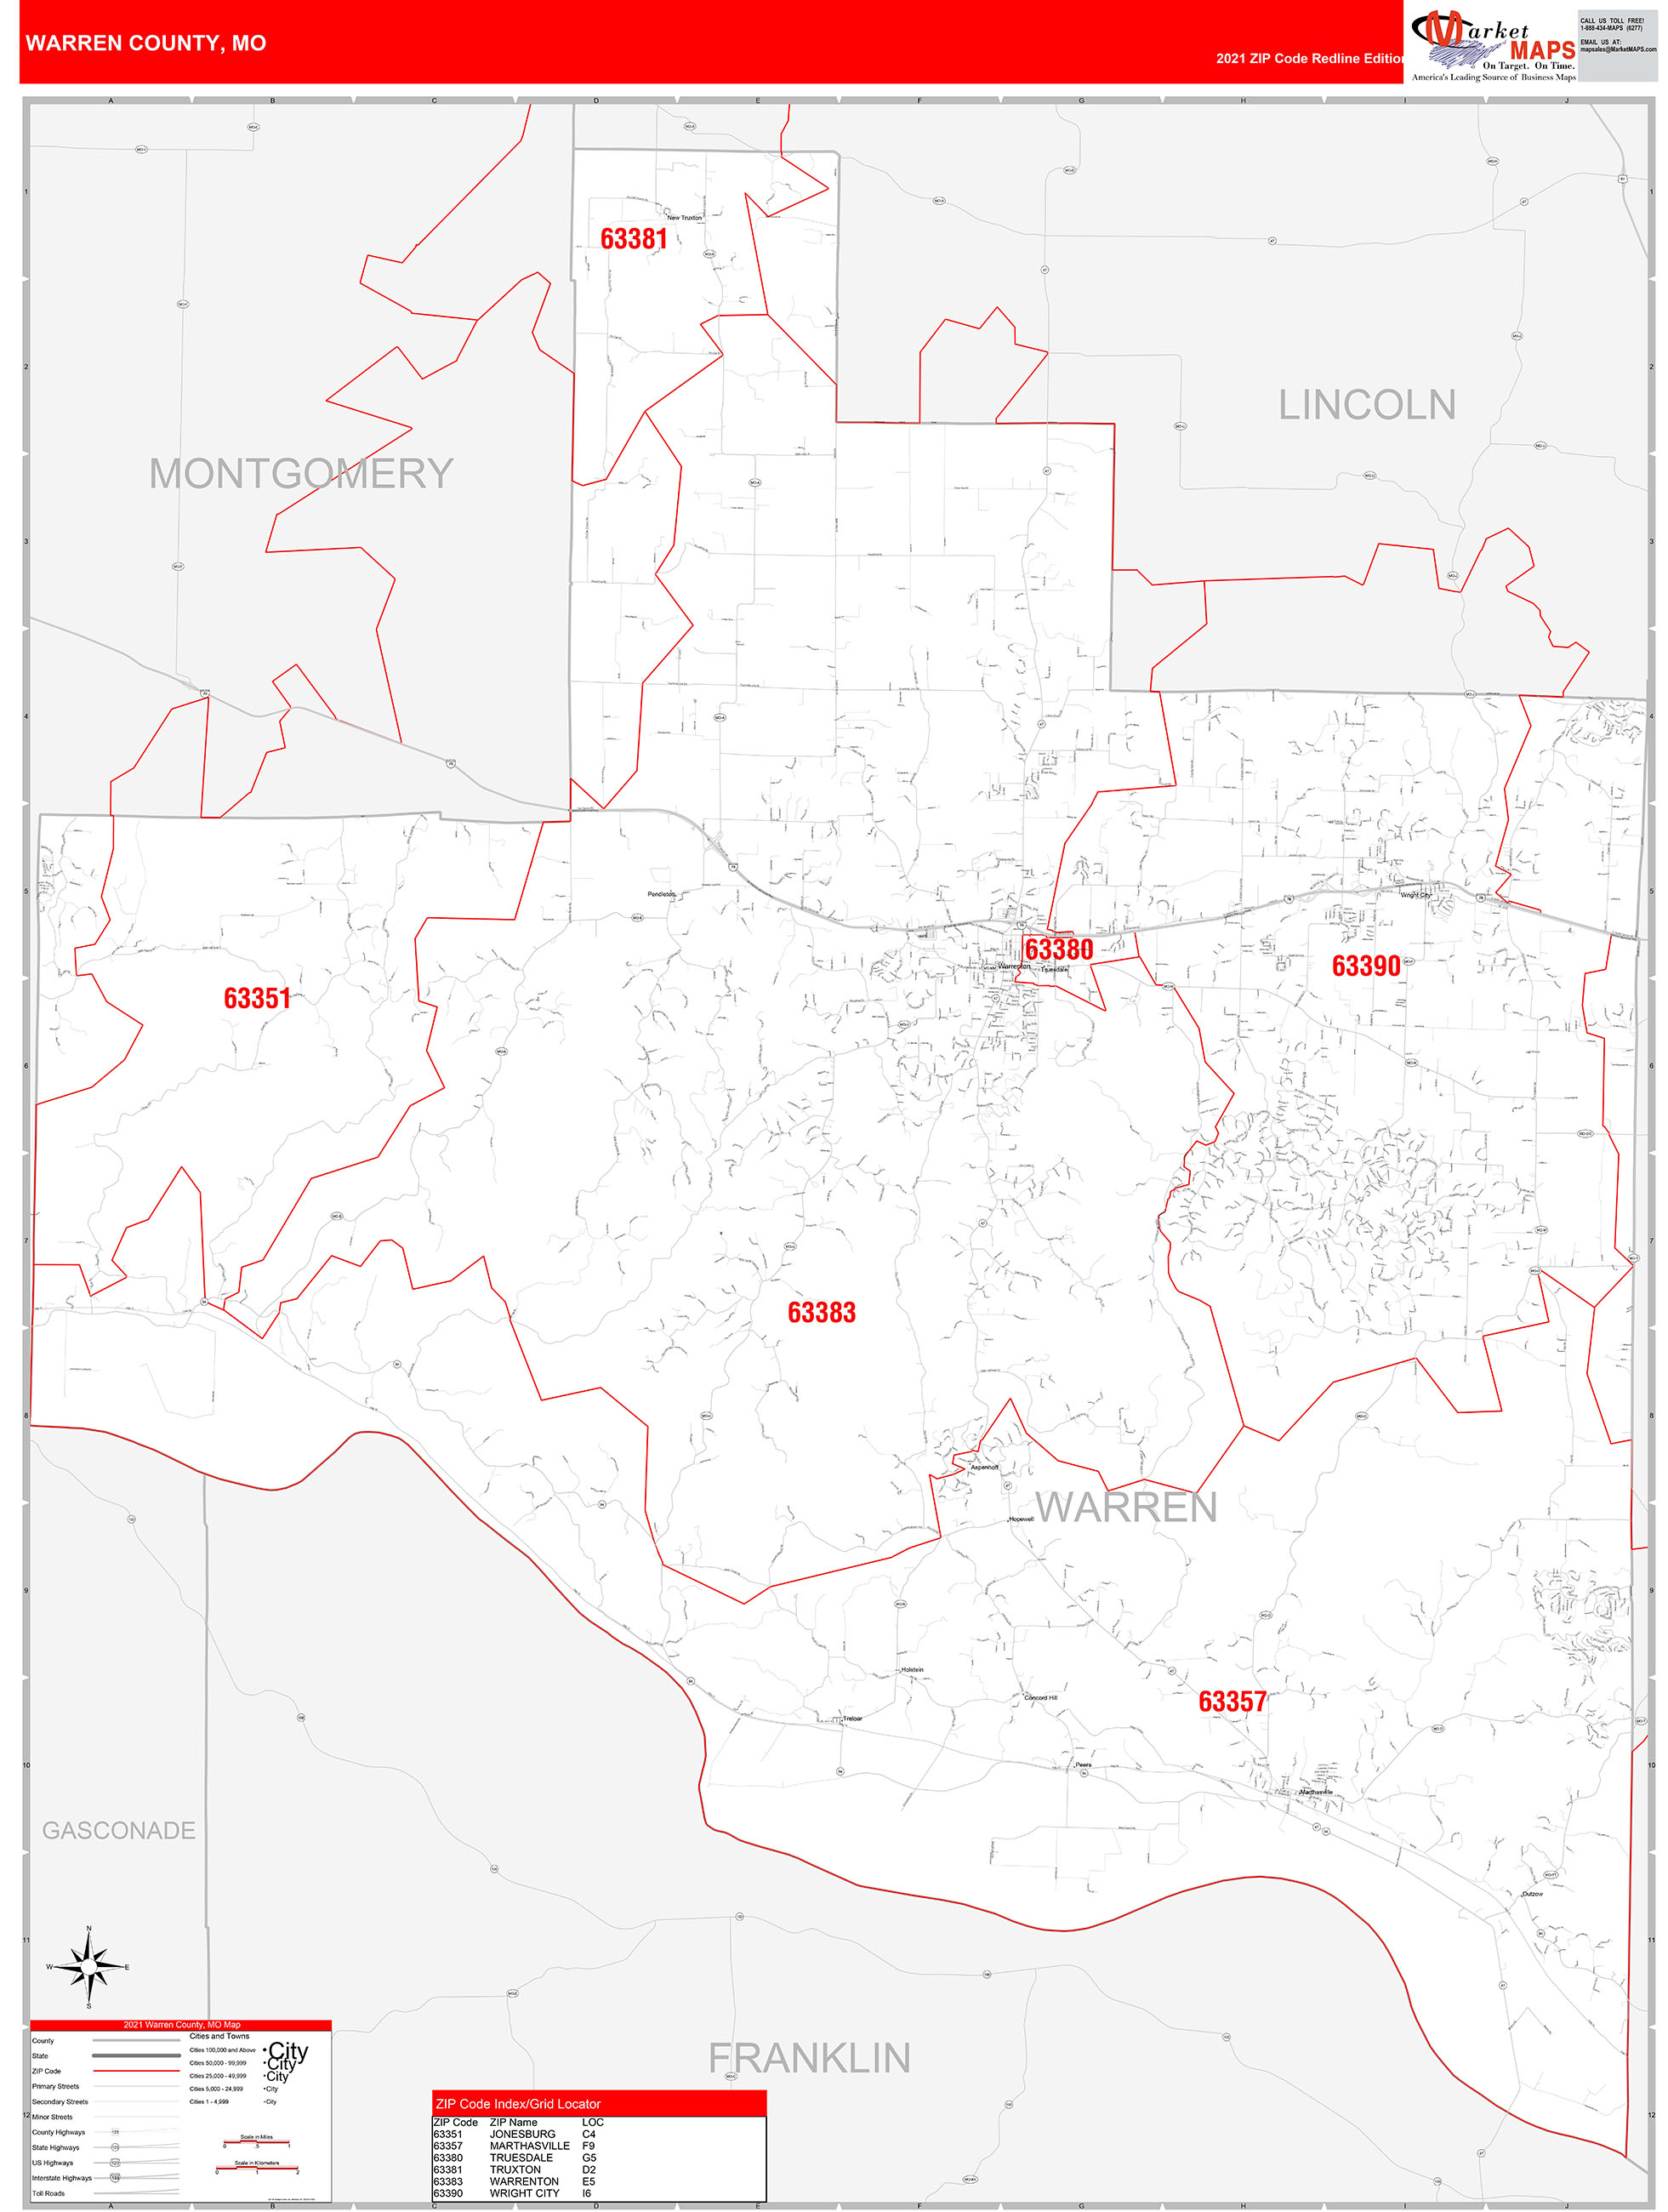 Warren County, MO Zip Code Wall Map Red Line Style by MarketMAPS MapSales